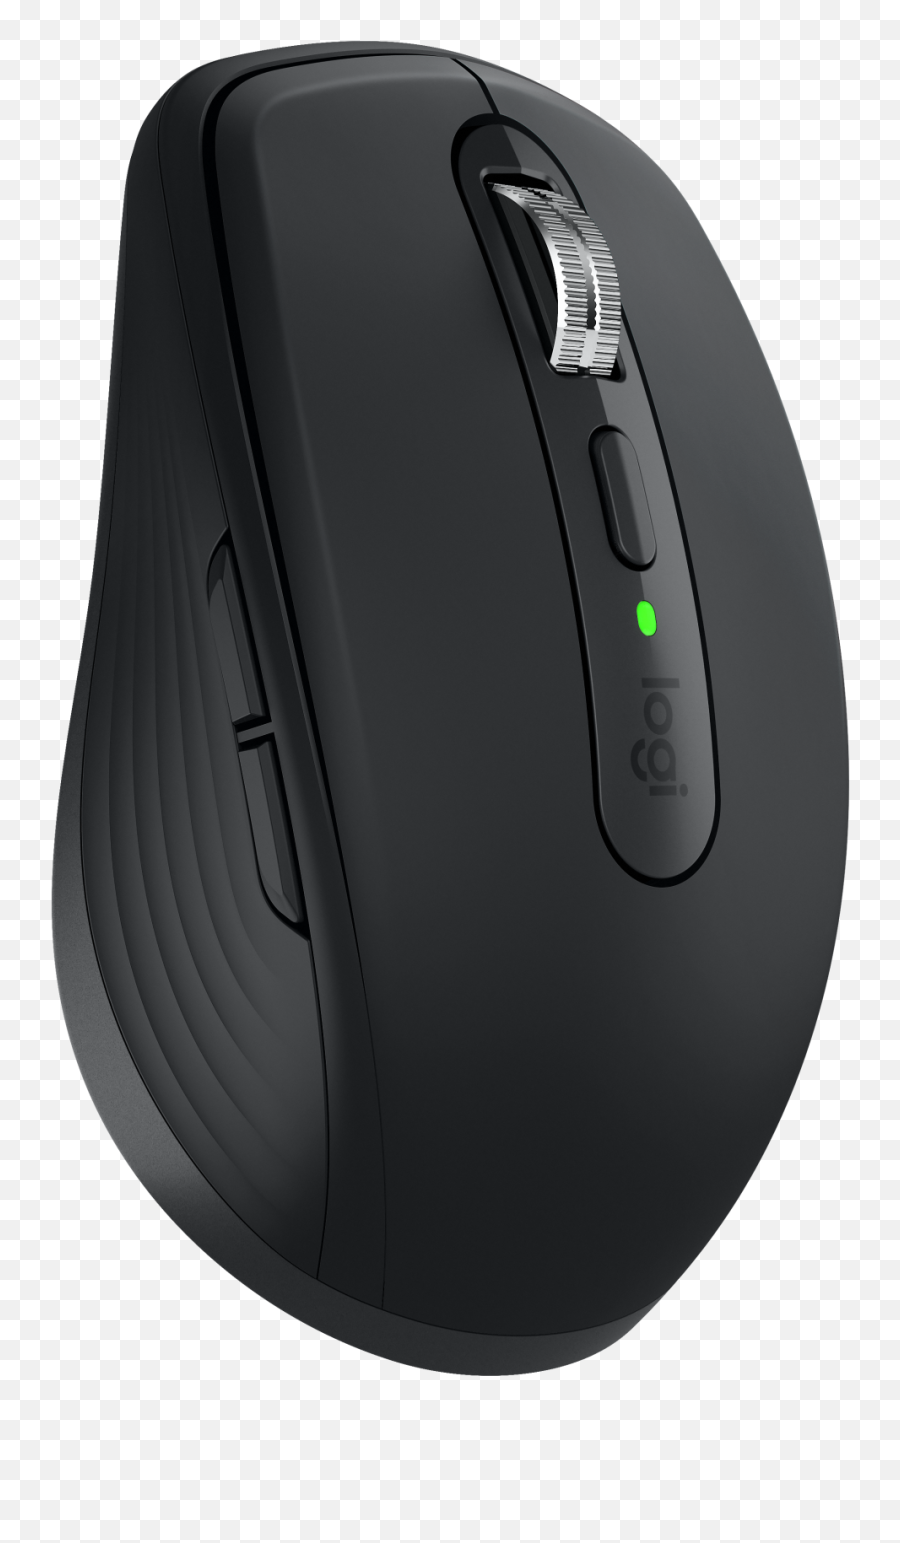 Logitech U201call Workspaces Are Ready For The New Year Emoji,Computer Mouse Emoji